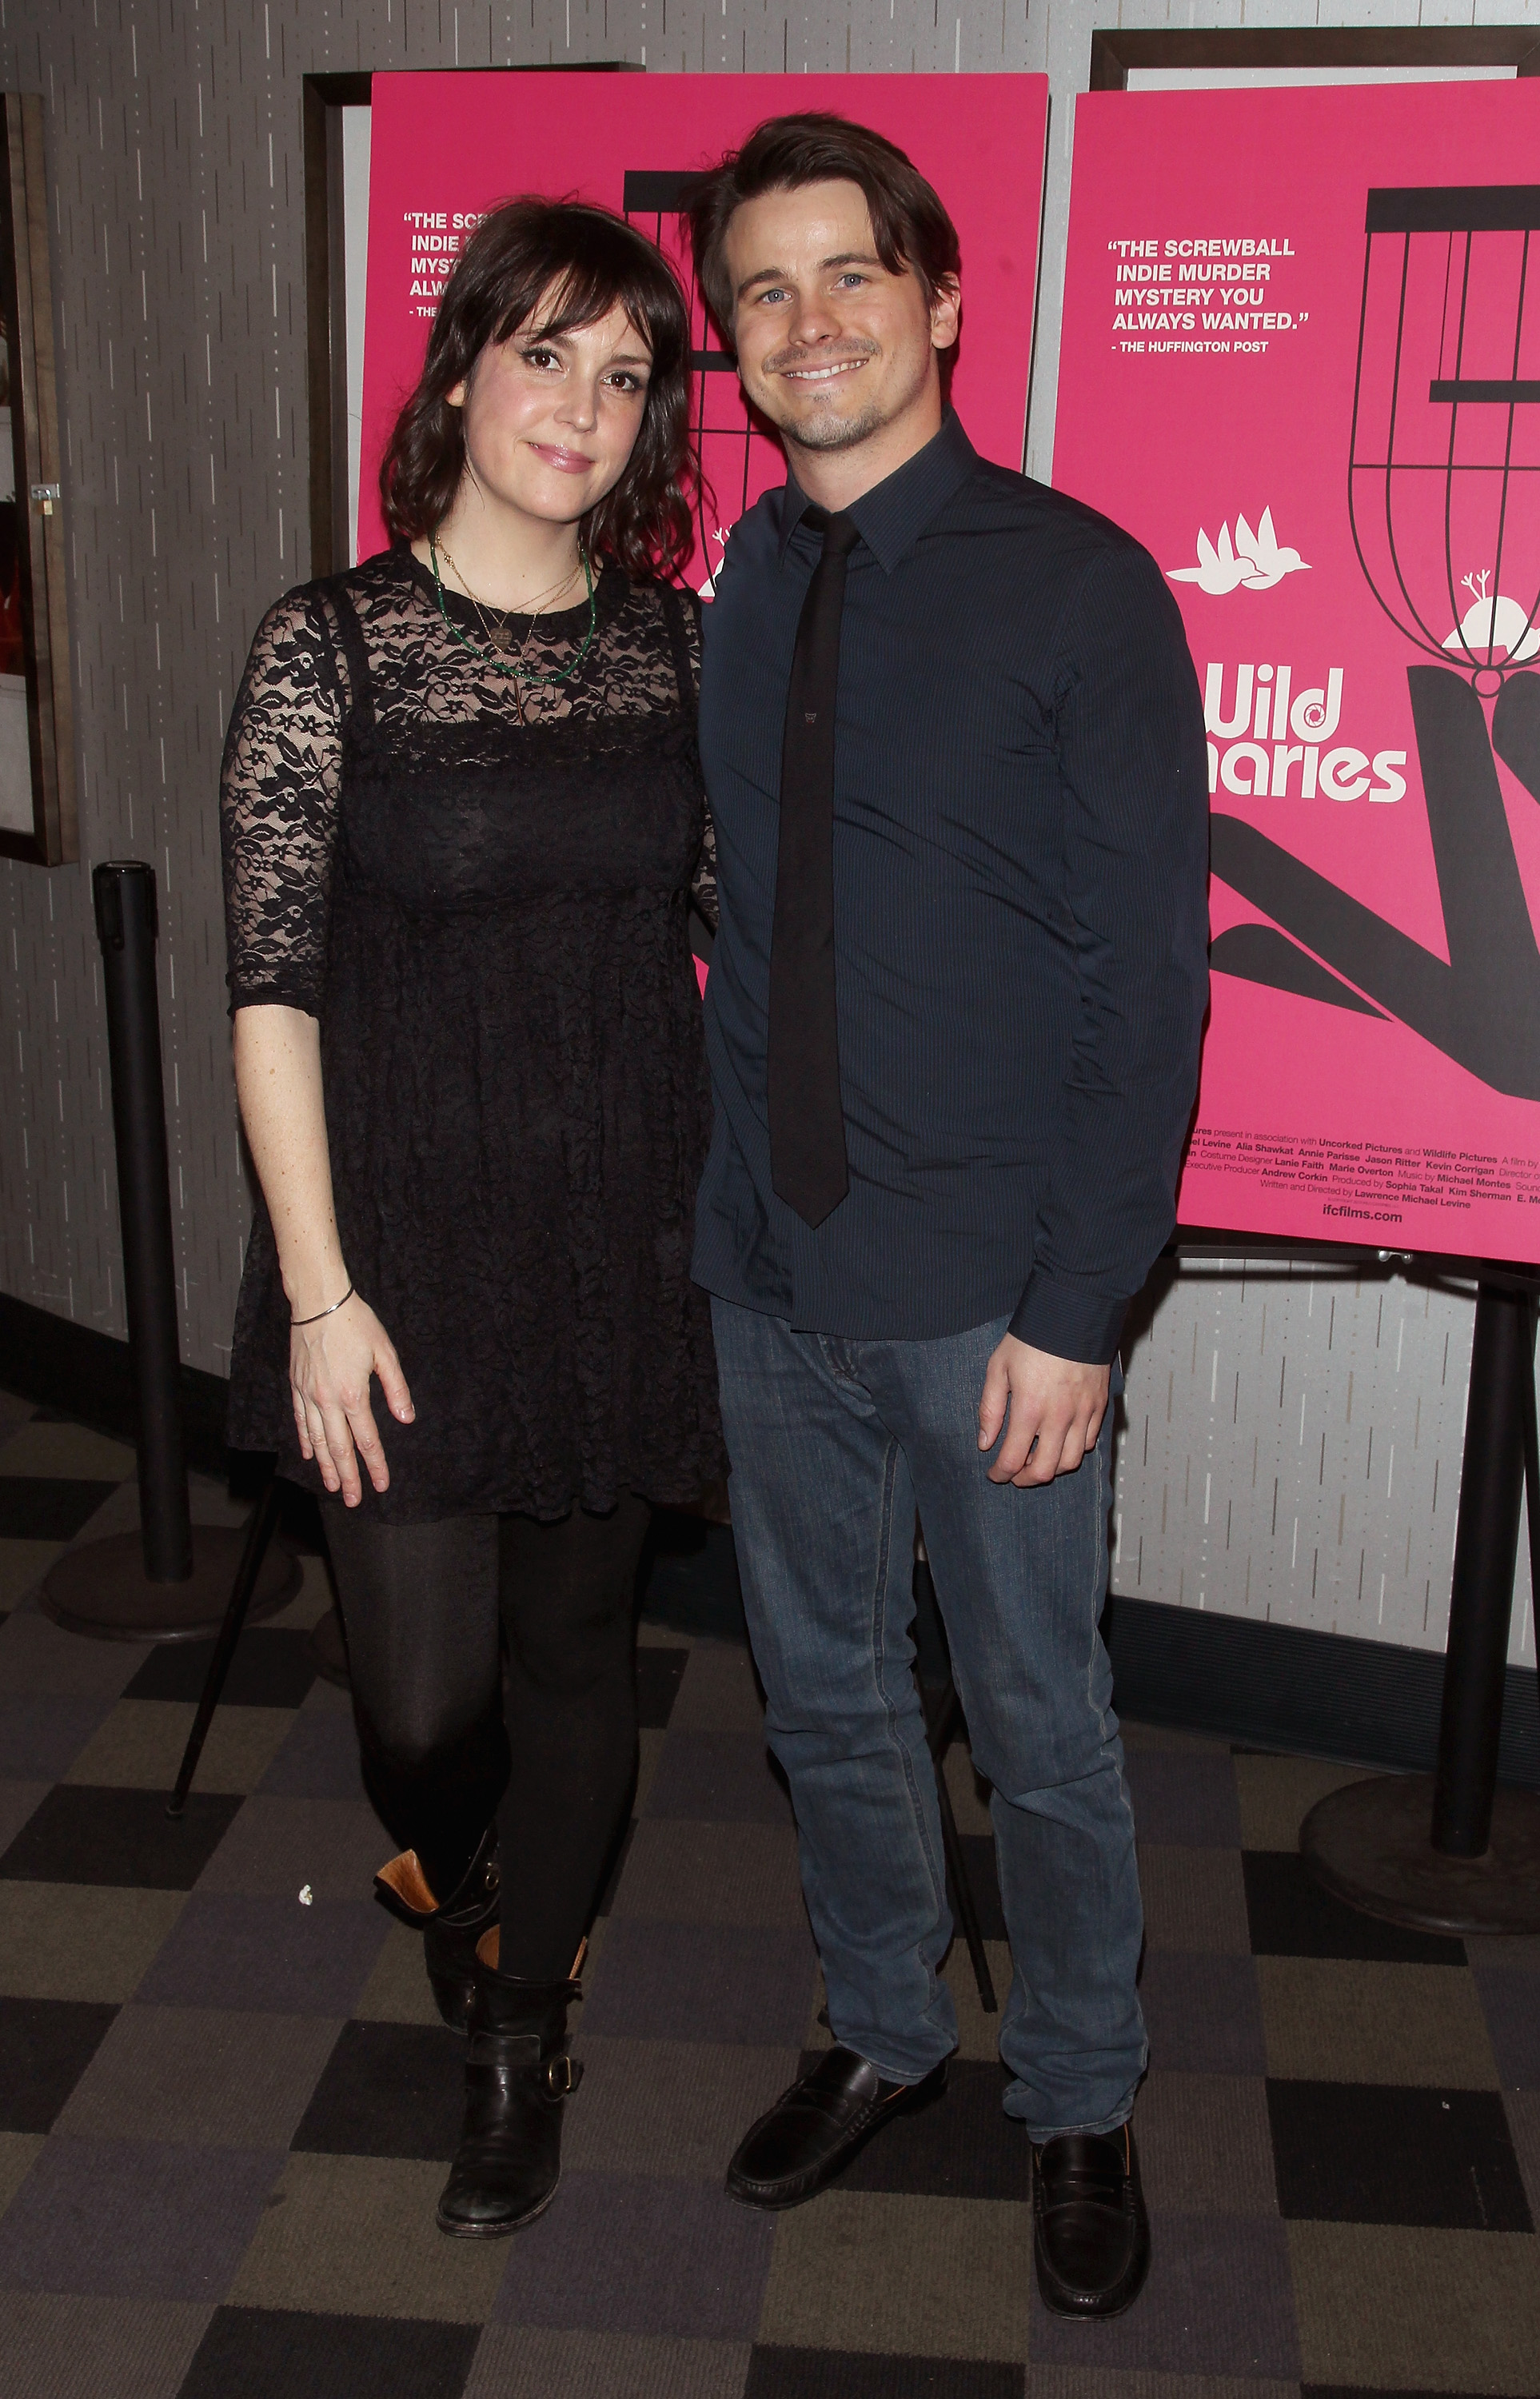 Melanie Lynskey and Jason Ritter attend the "Wild Canaries" New York premiere at the IFC Center on February 25, 2015 in New York City | Source: Getty Images